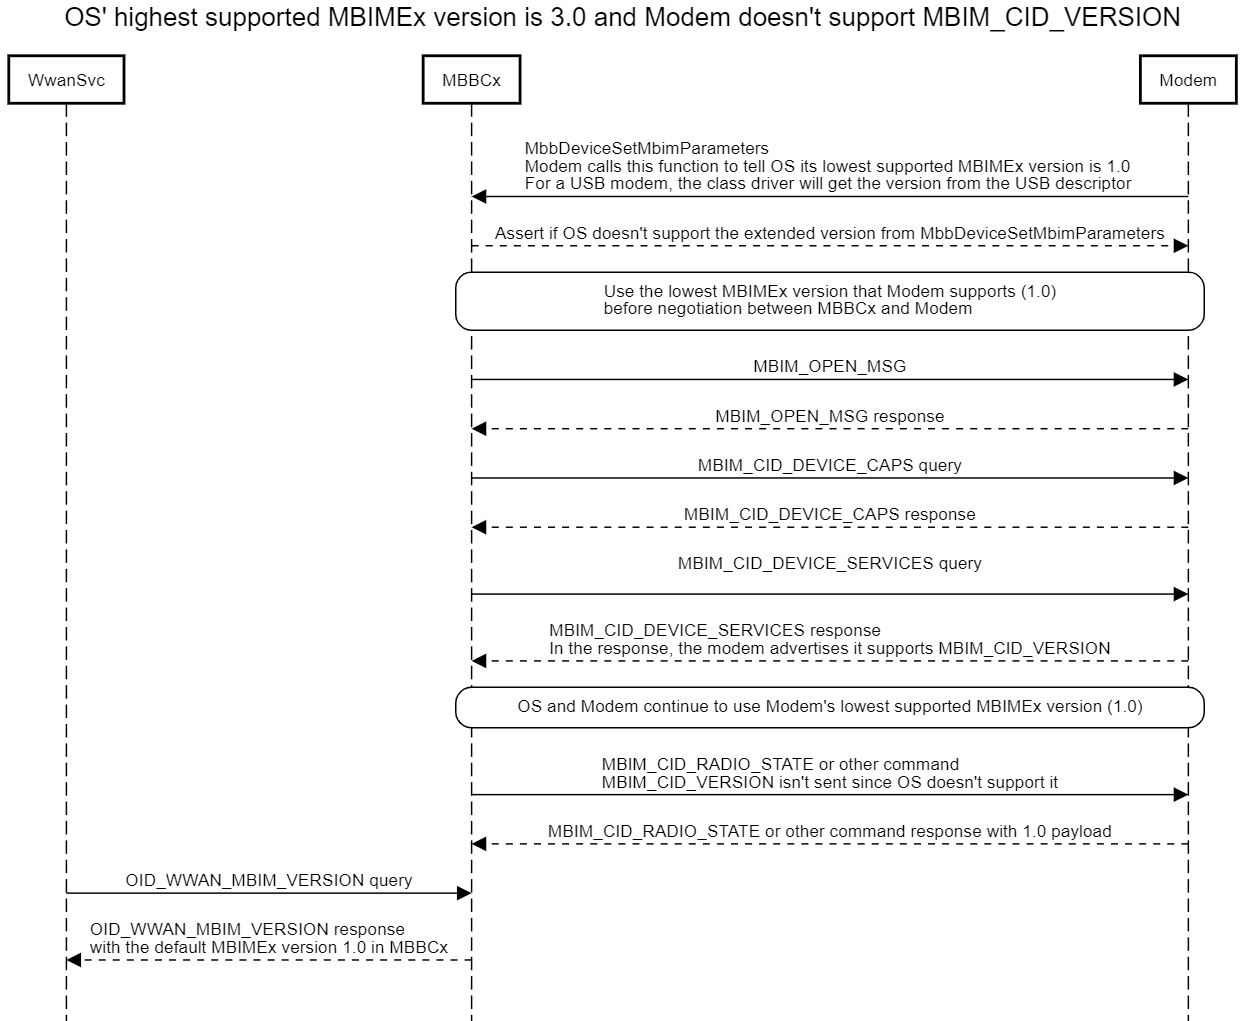 Diagram showing OS with highest MBIMEx version 3.0 and modem without MBIM_CID_VERSION support.